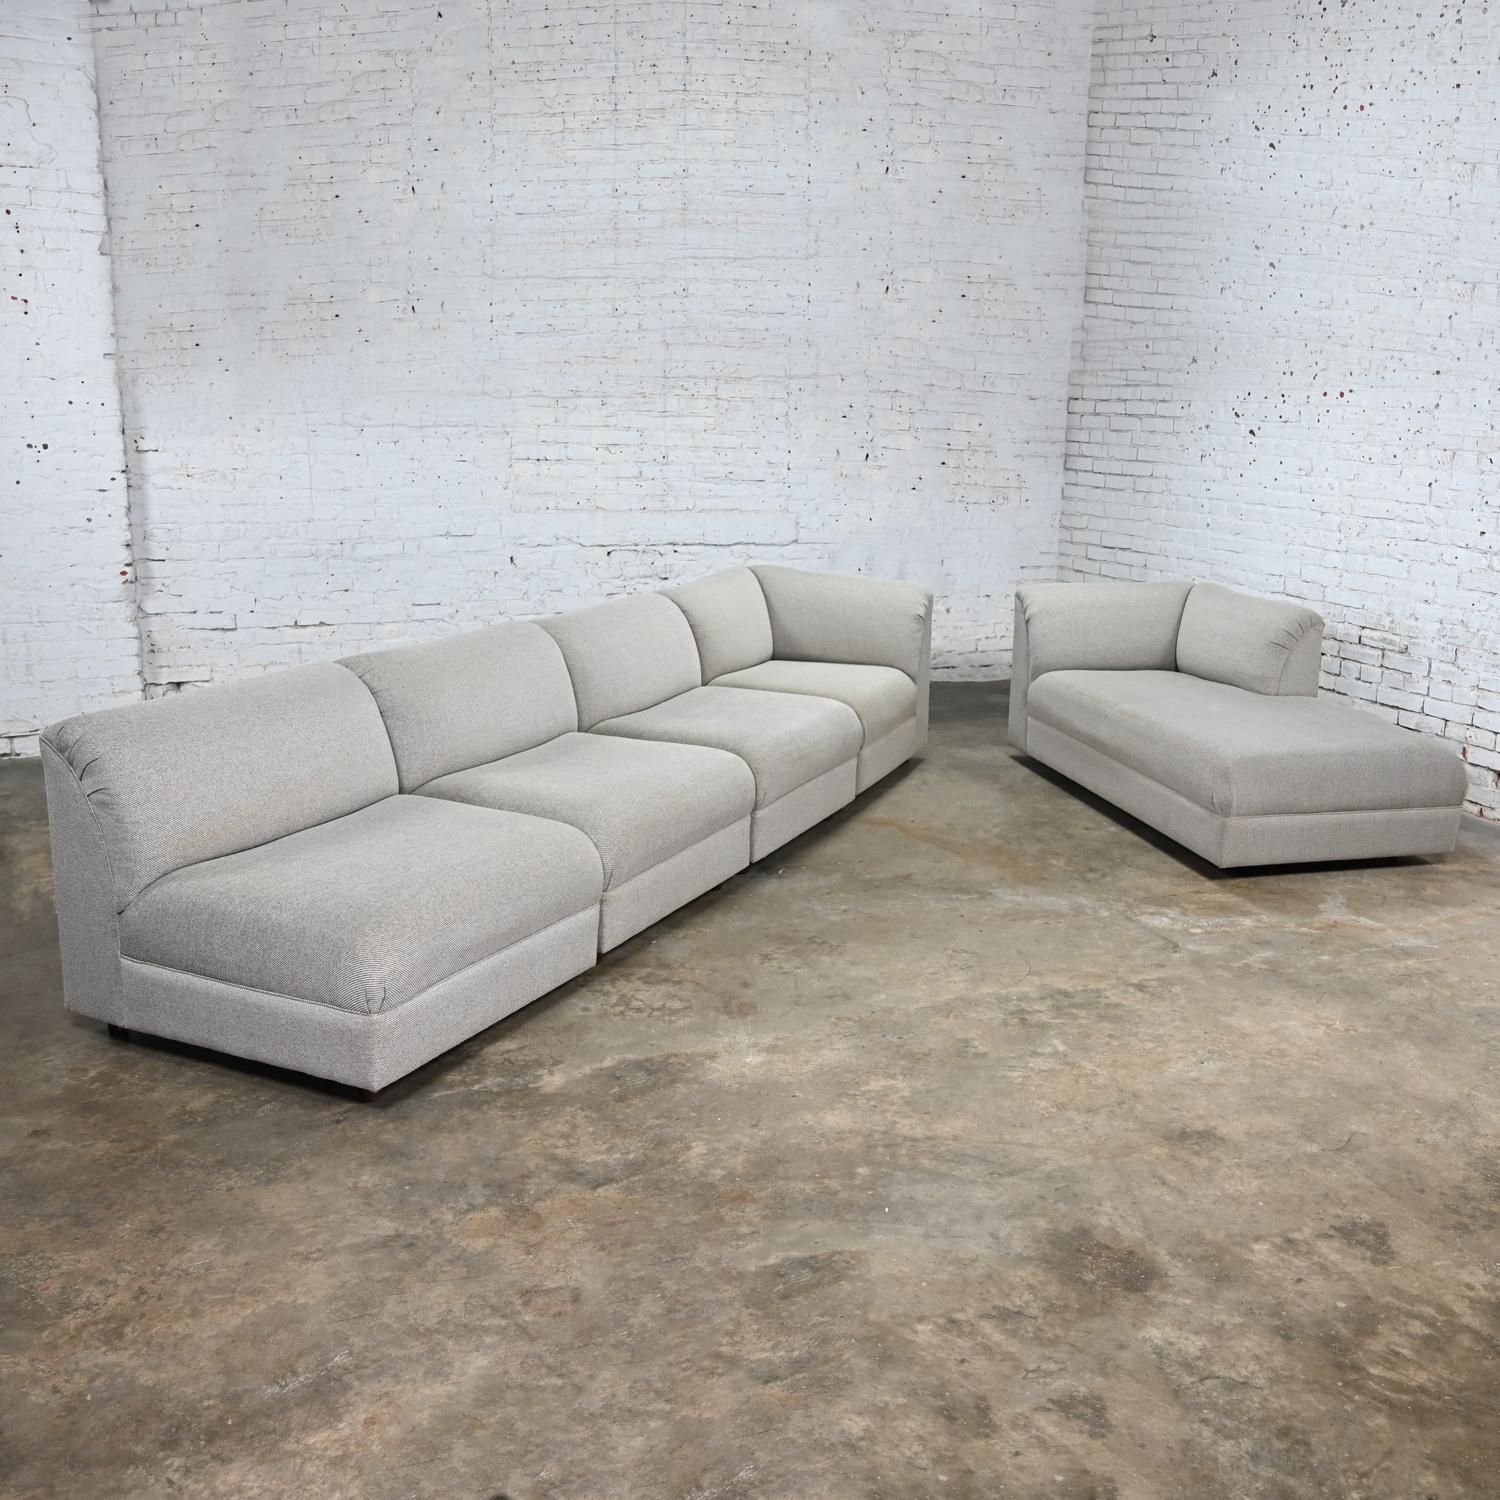 Late 20th Century Modern Modular Sectional Sofa 5 Pieces with Chaise Gray Tweed  For Sale 1